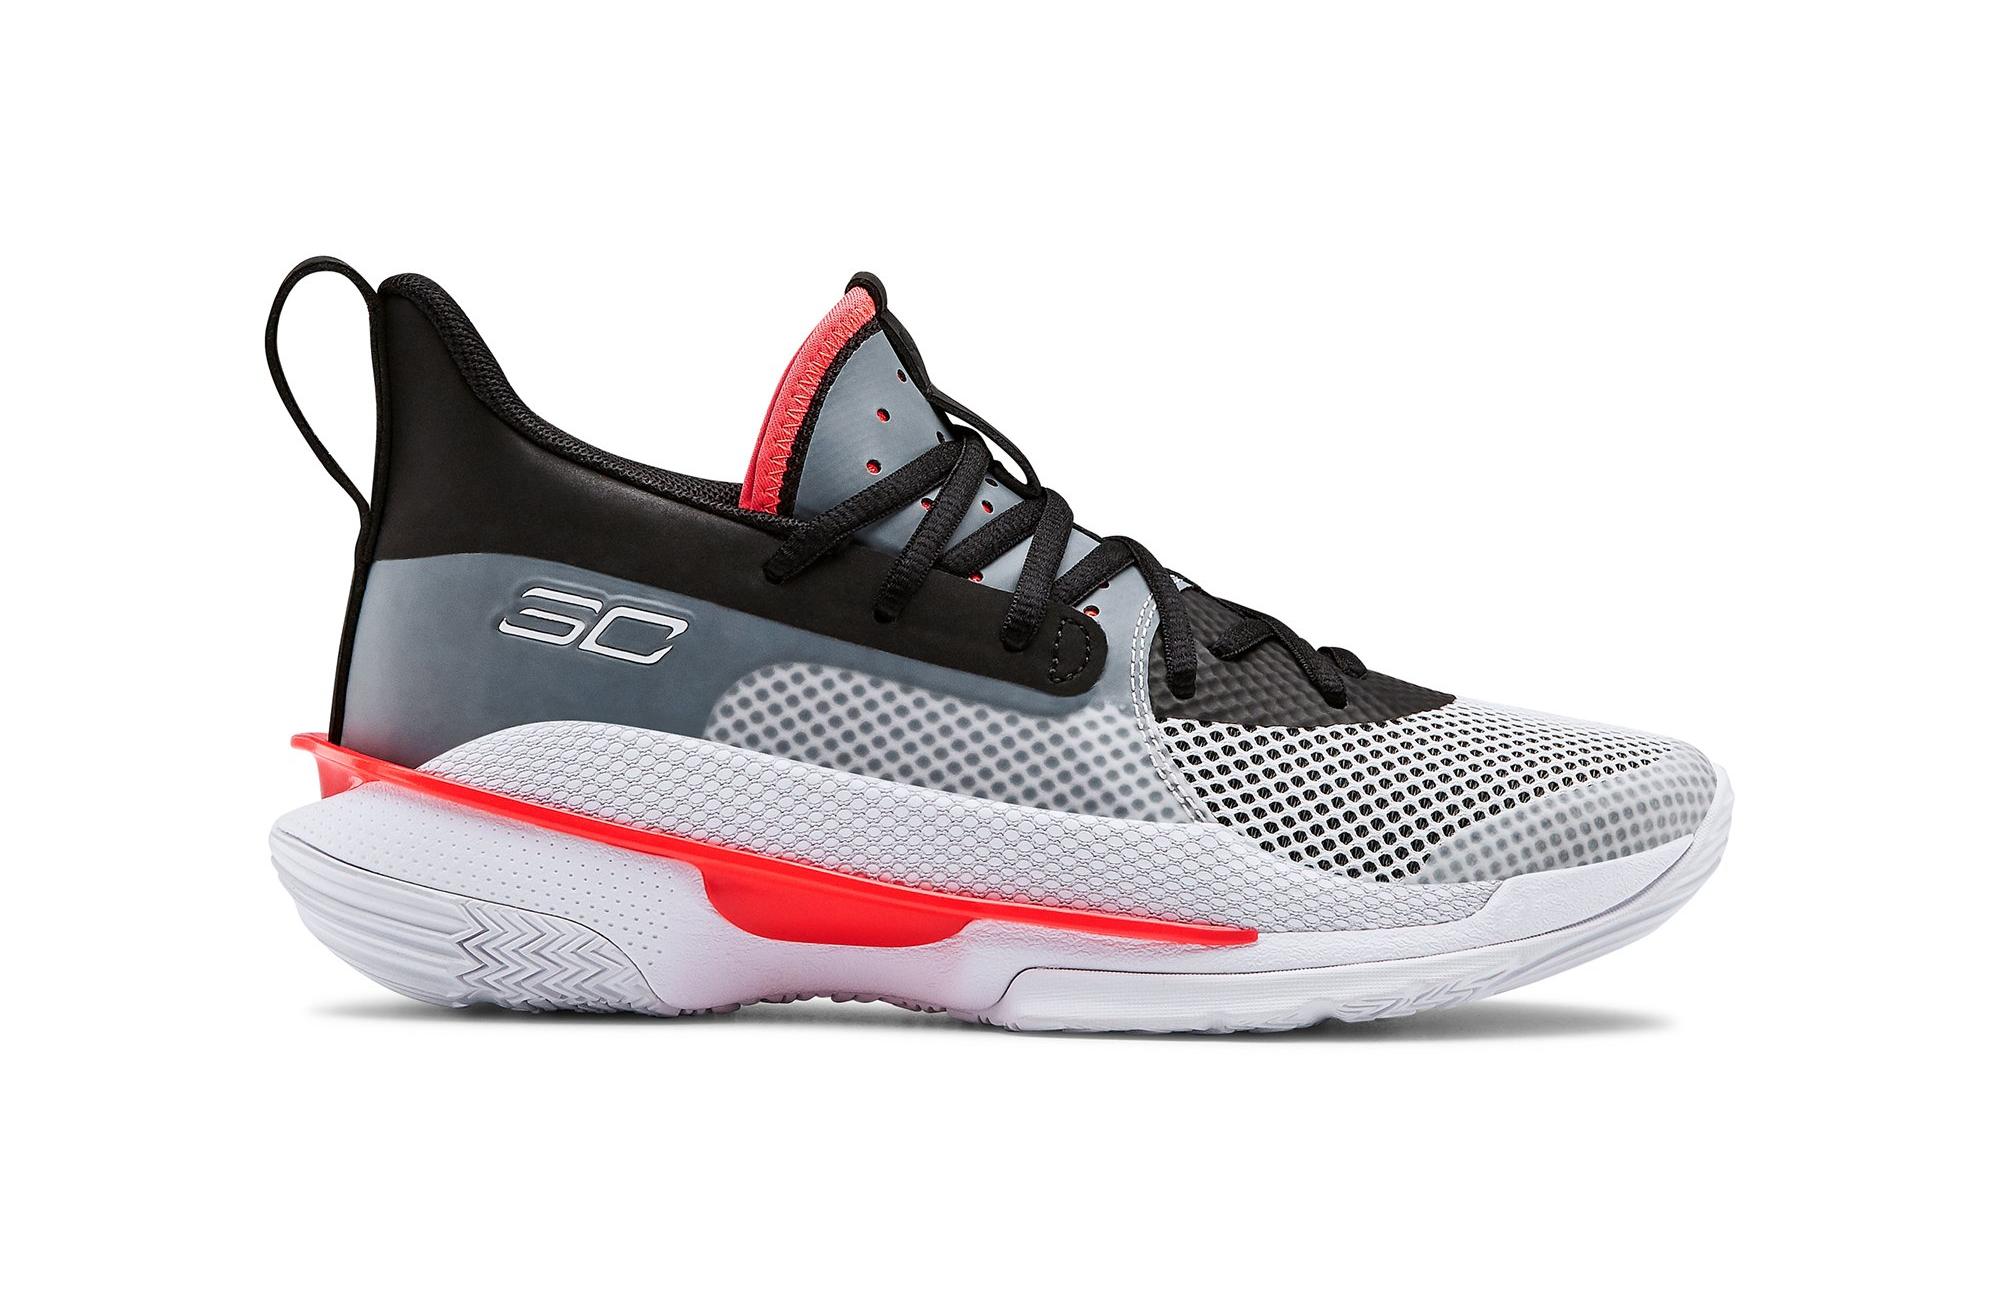 Sneakers Release: Under Armor Curry 7 “White” Men’s Basketball Shoe